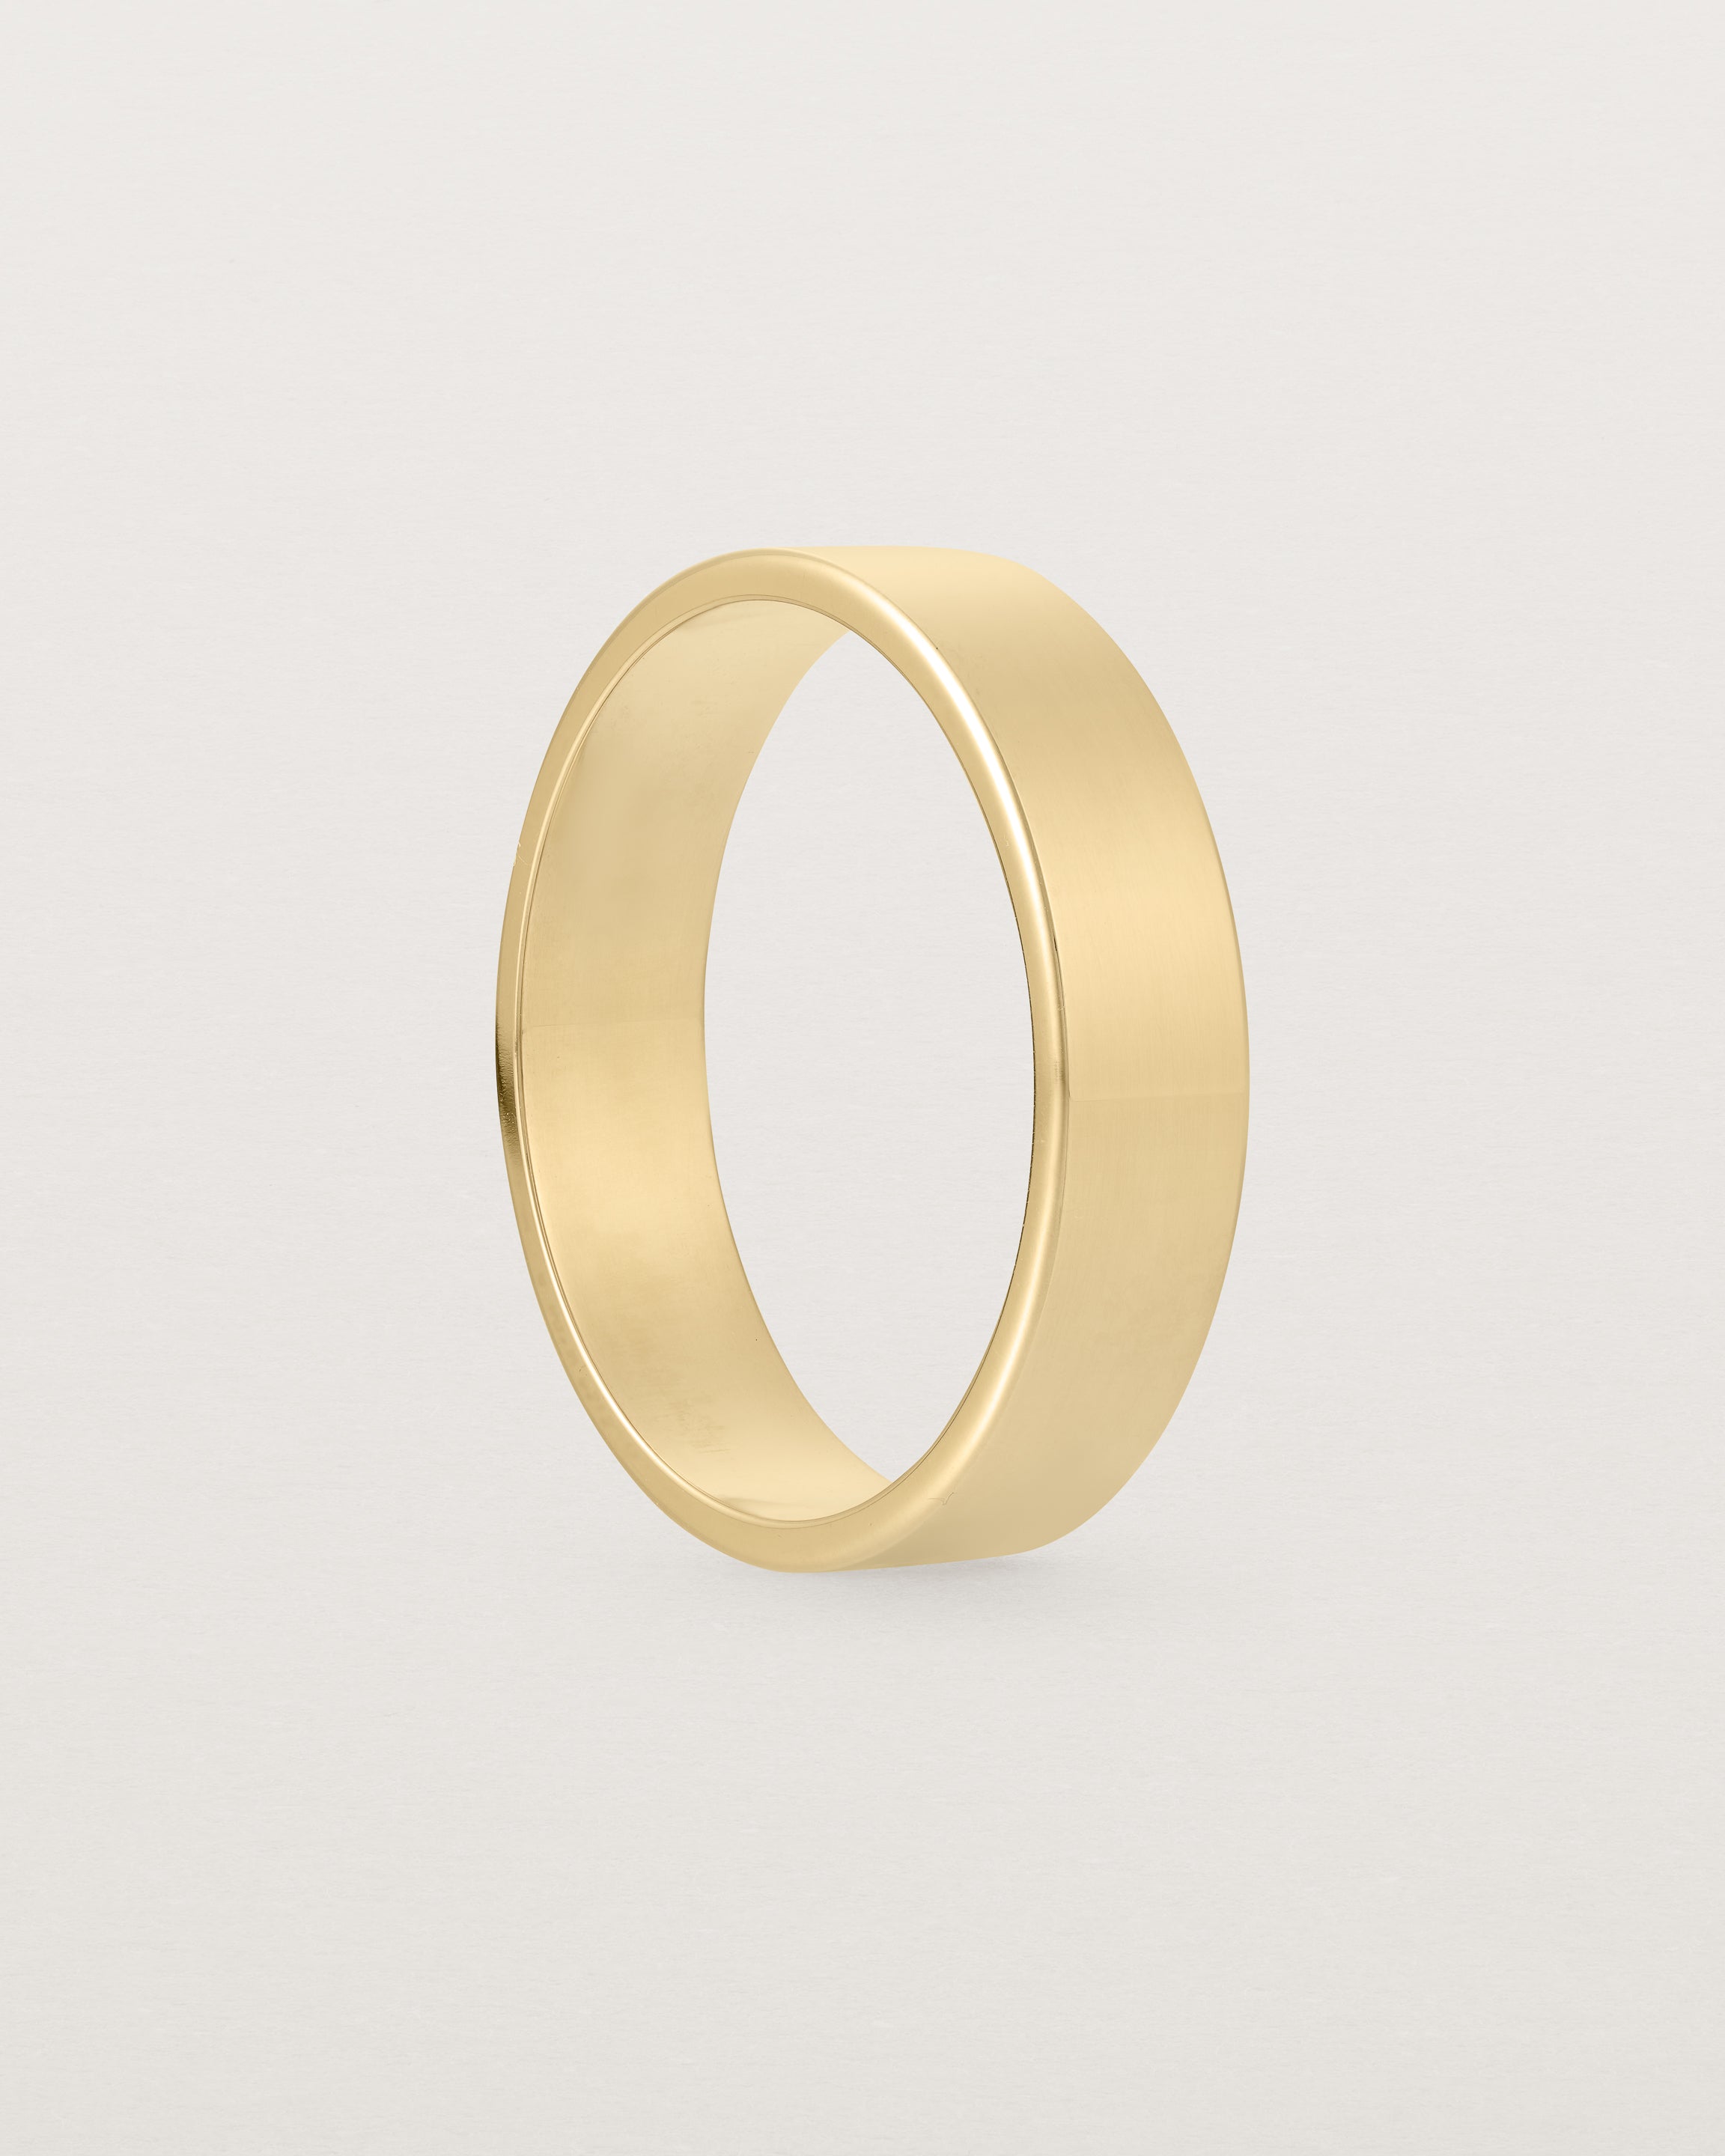 The side profile of our square profile, 5mm flat wedding band crafted in yellow gold